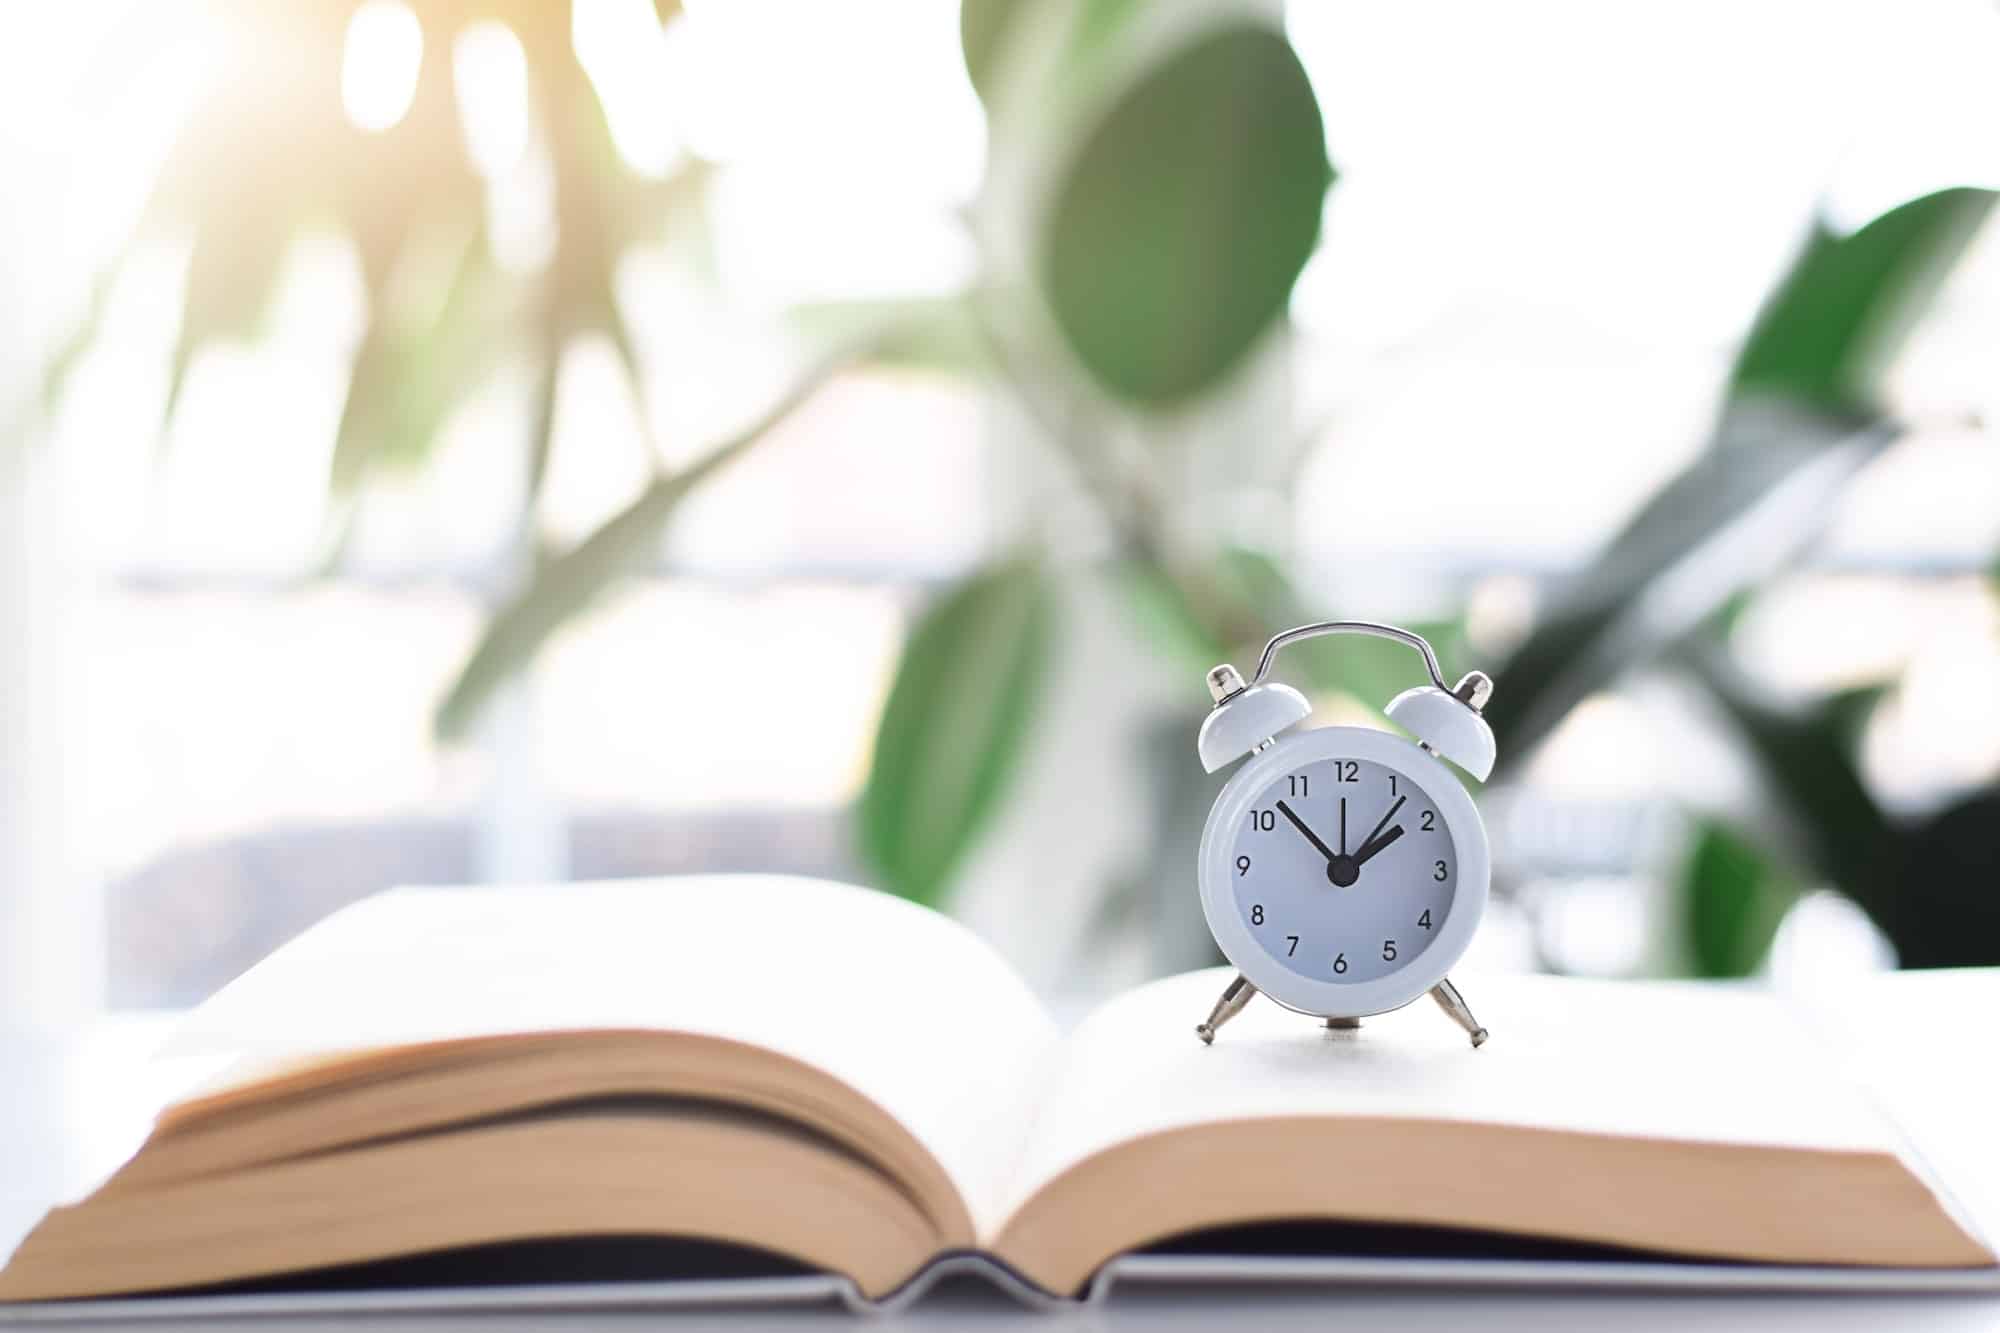 Clock on top of an open book with blurry green houseplants in the background. Reading time